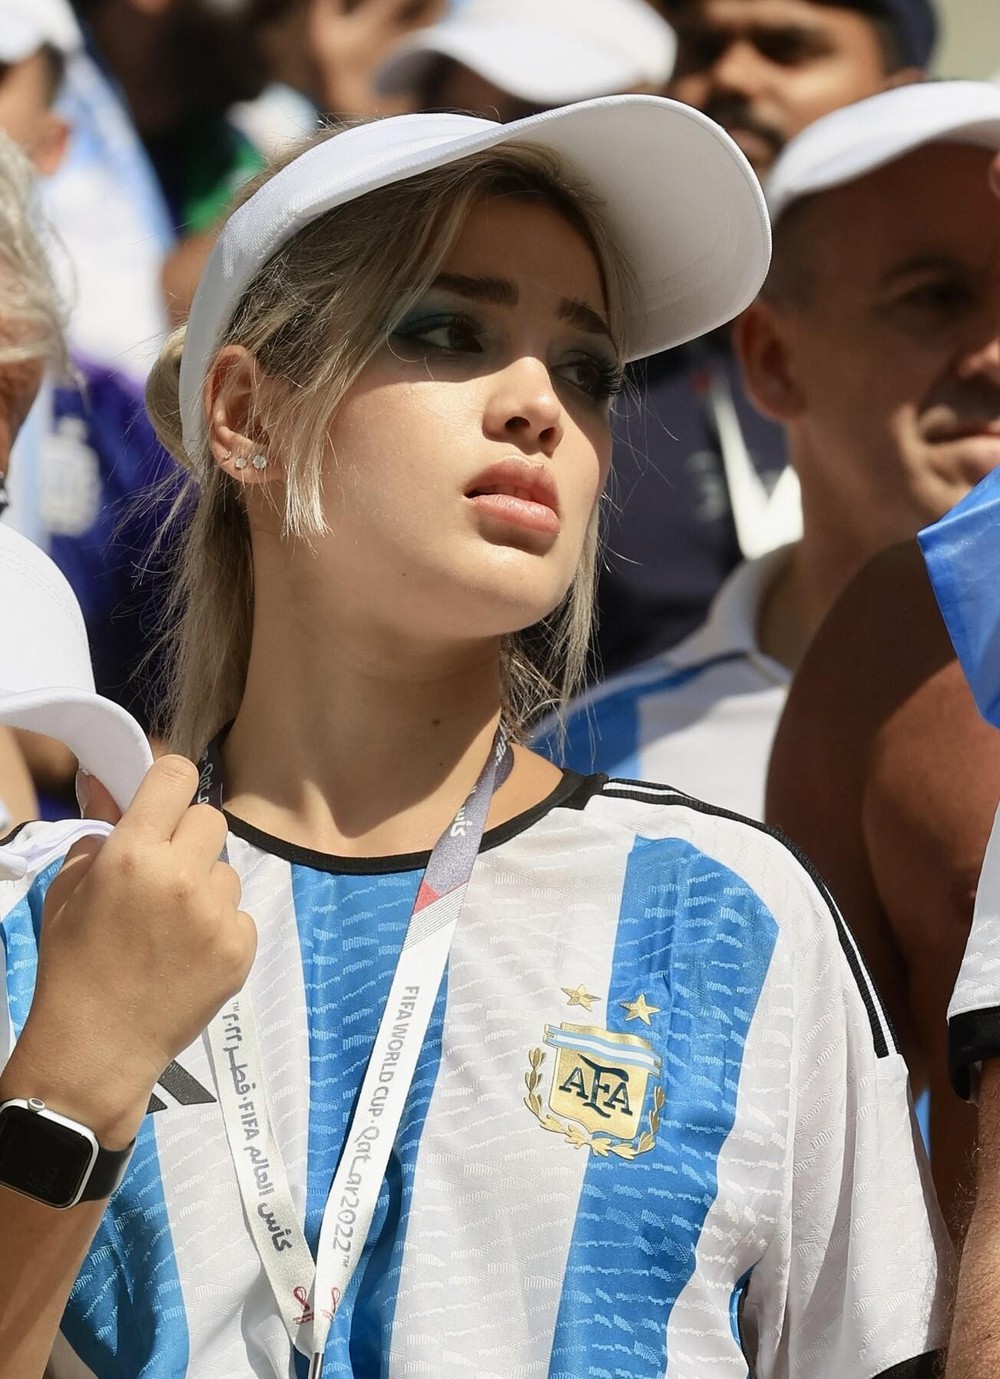 See the beautiful Argentina fans on the stage of the World Cup 2022 - Photo 2.